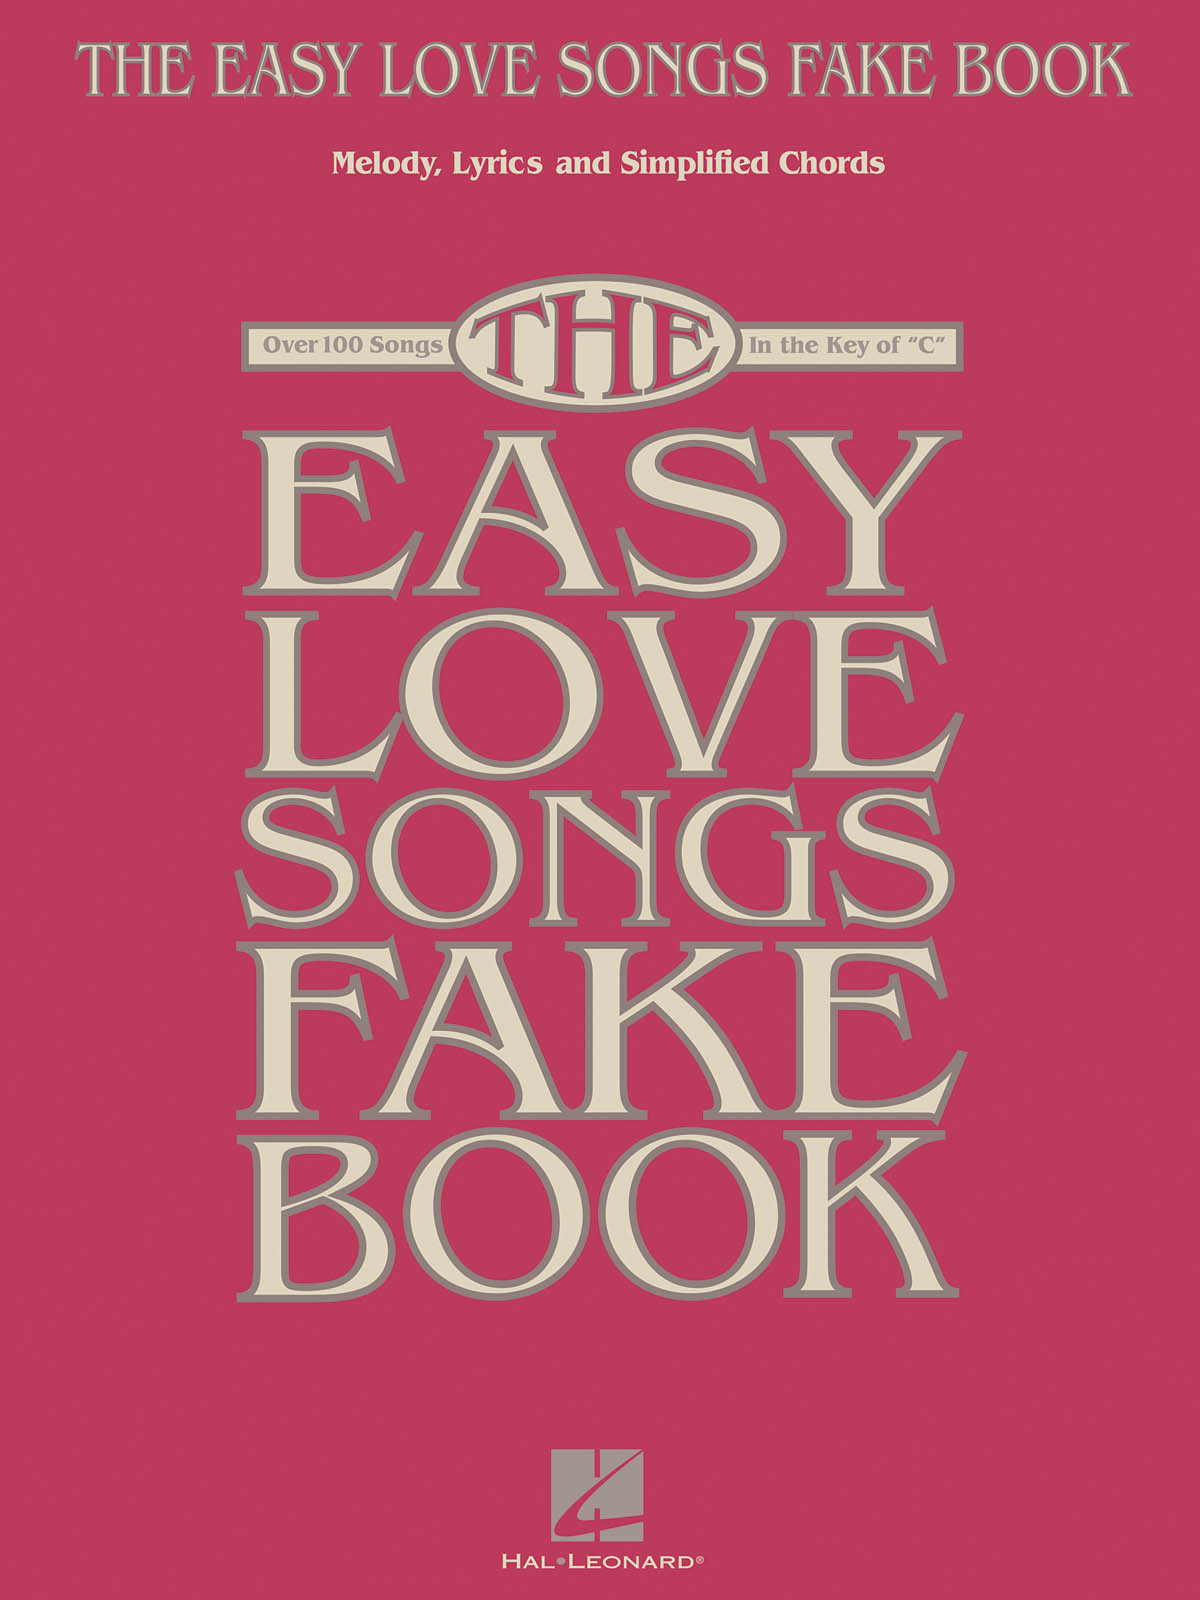 The Easy Love Songs Fake Book - Melody, Lyrics & Simplified Chords in the Key of C